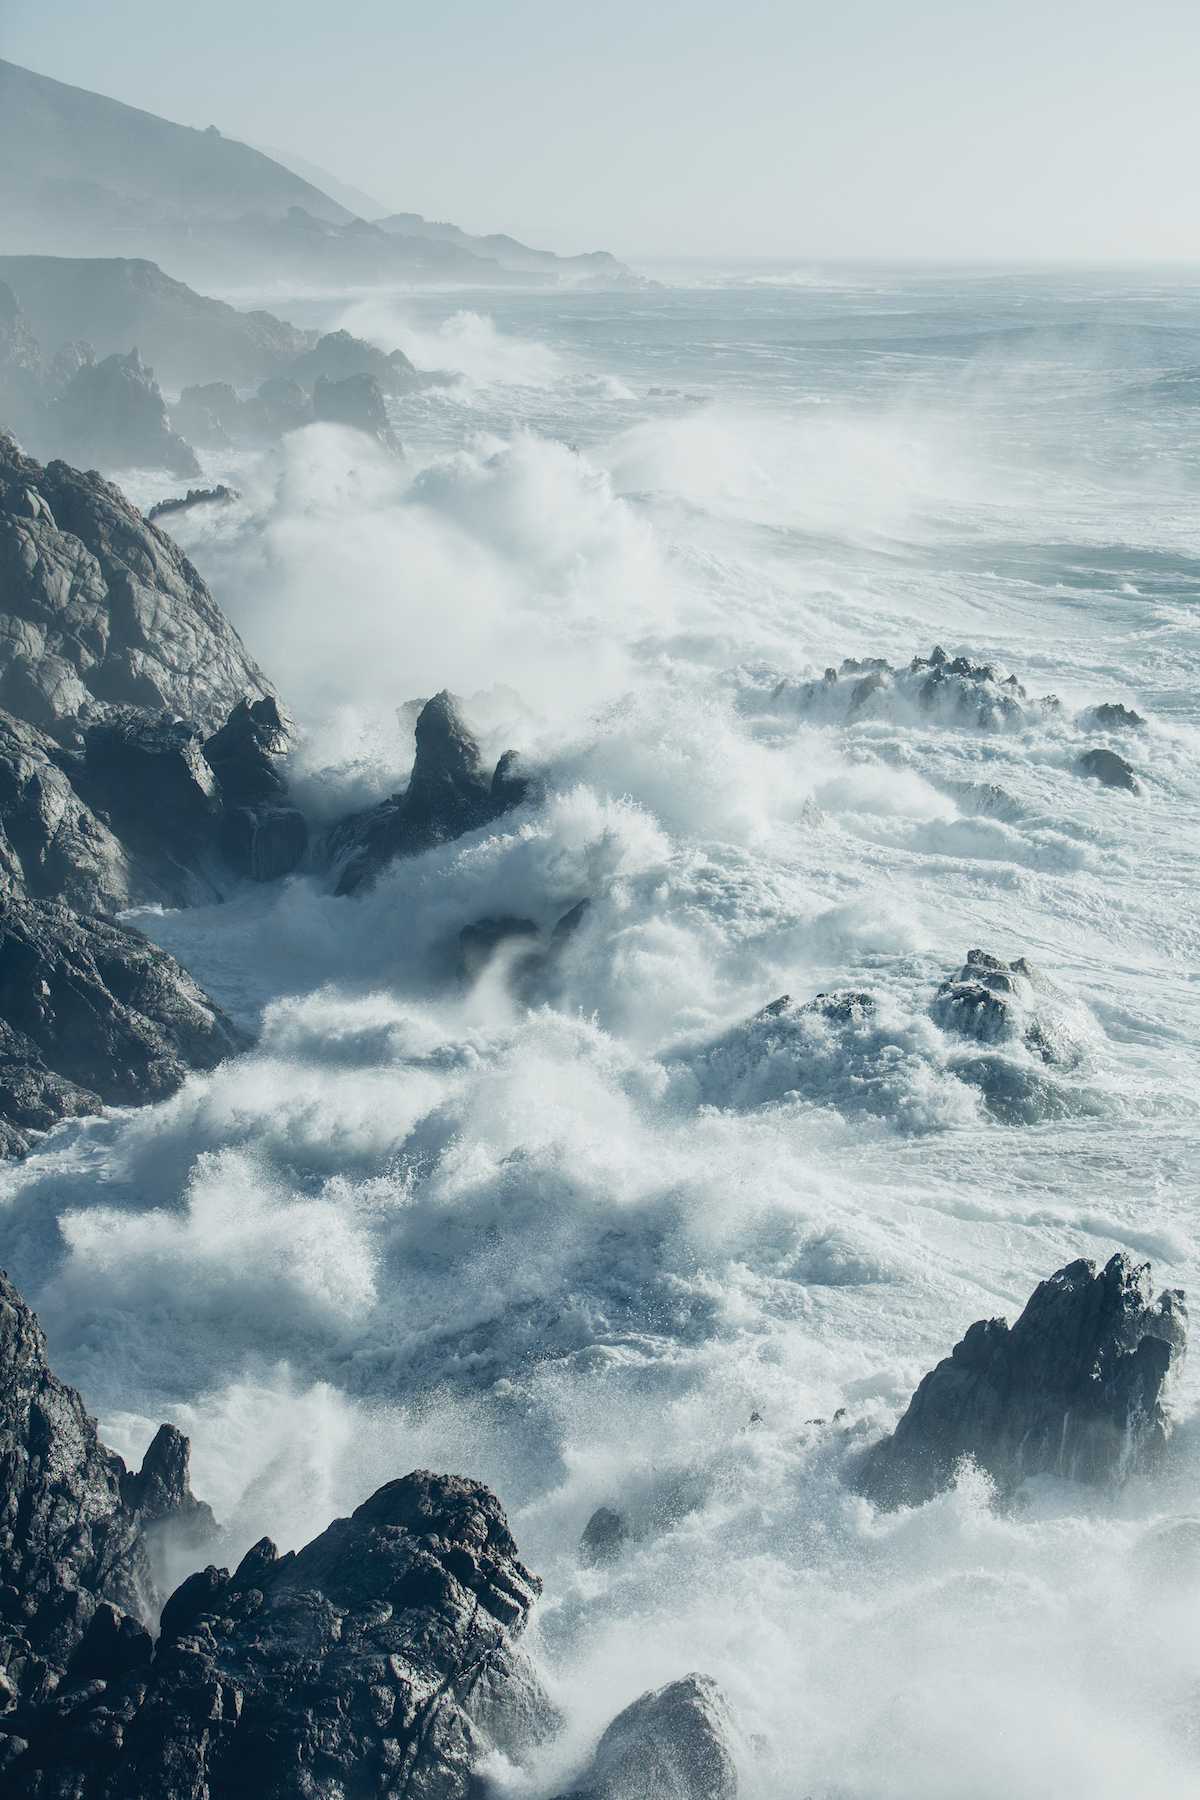 The Pacific Ocean coastline, with waves crashing against the shore.